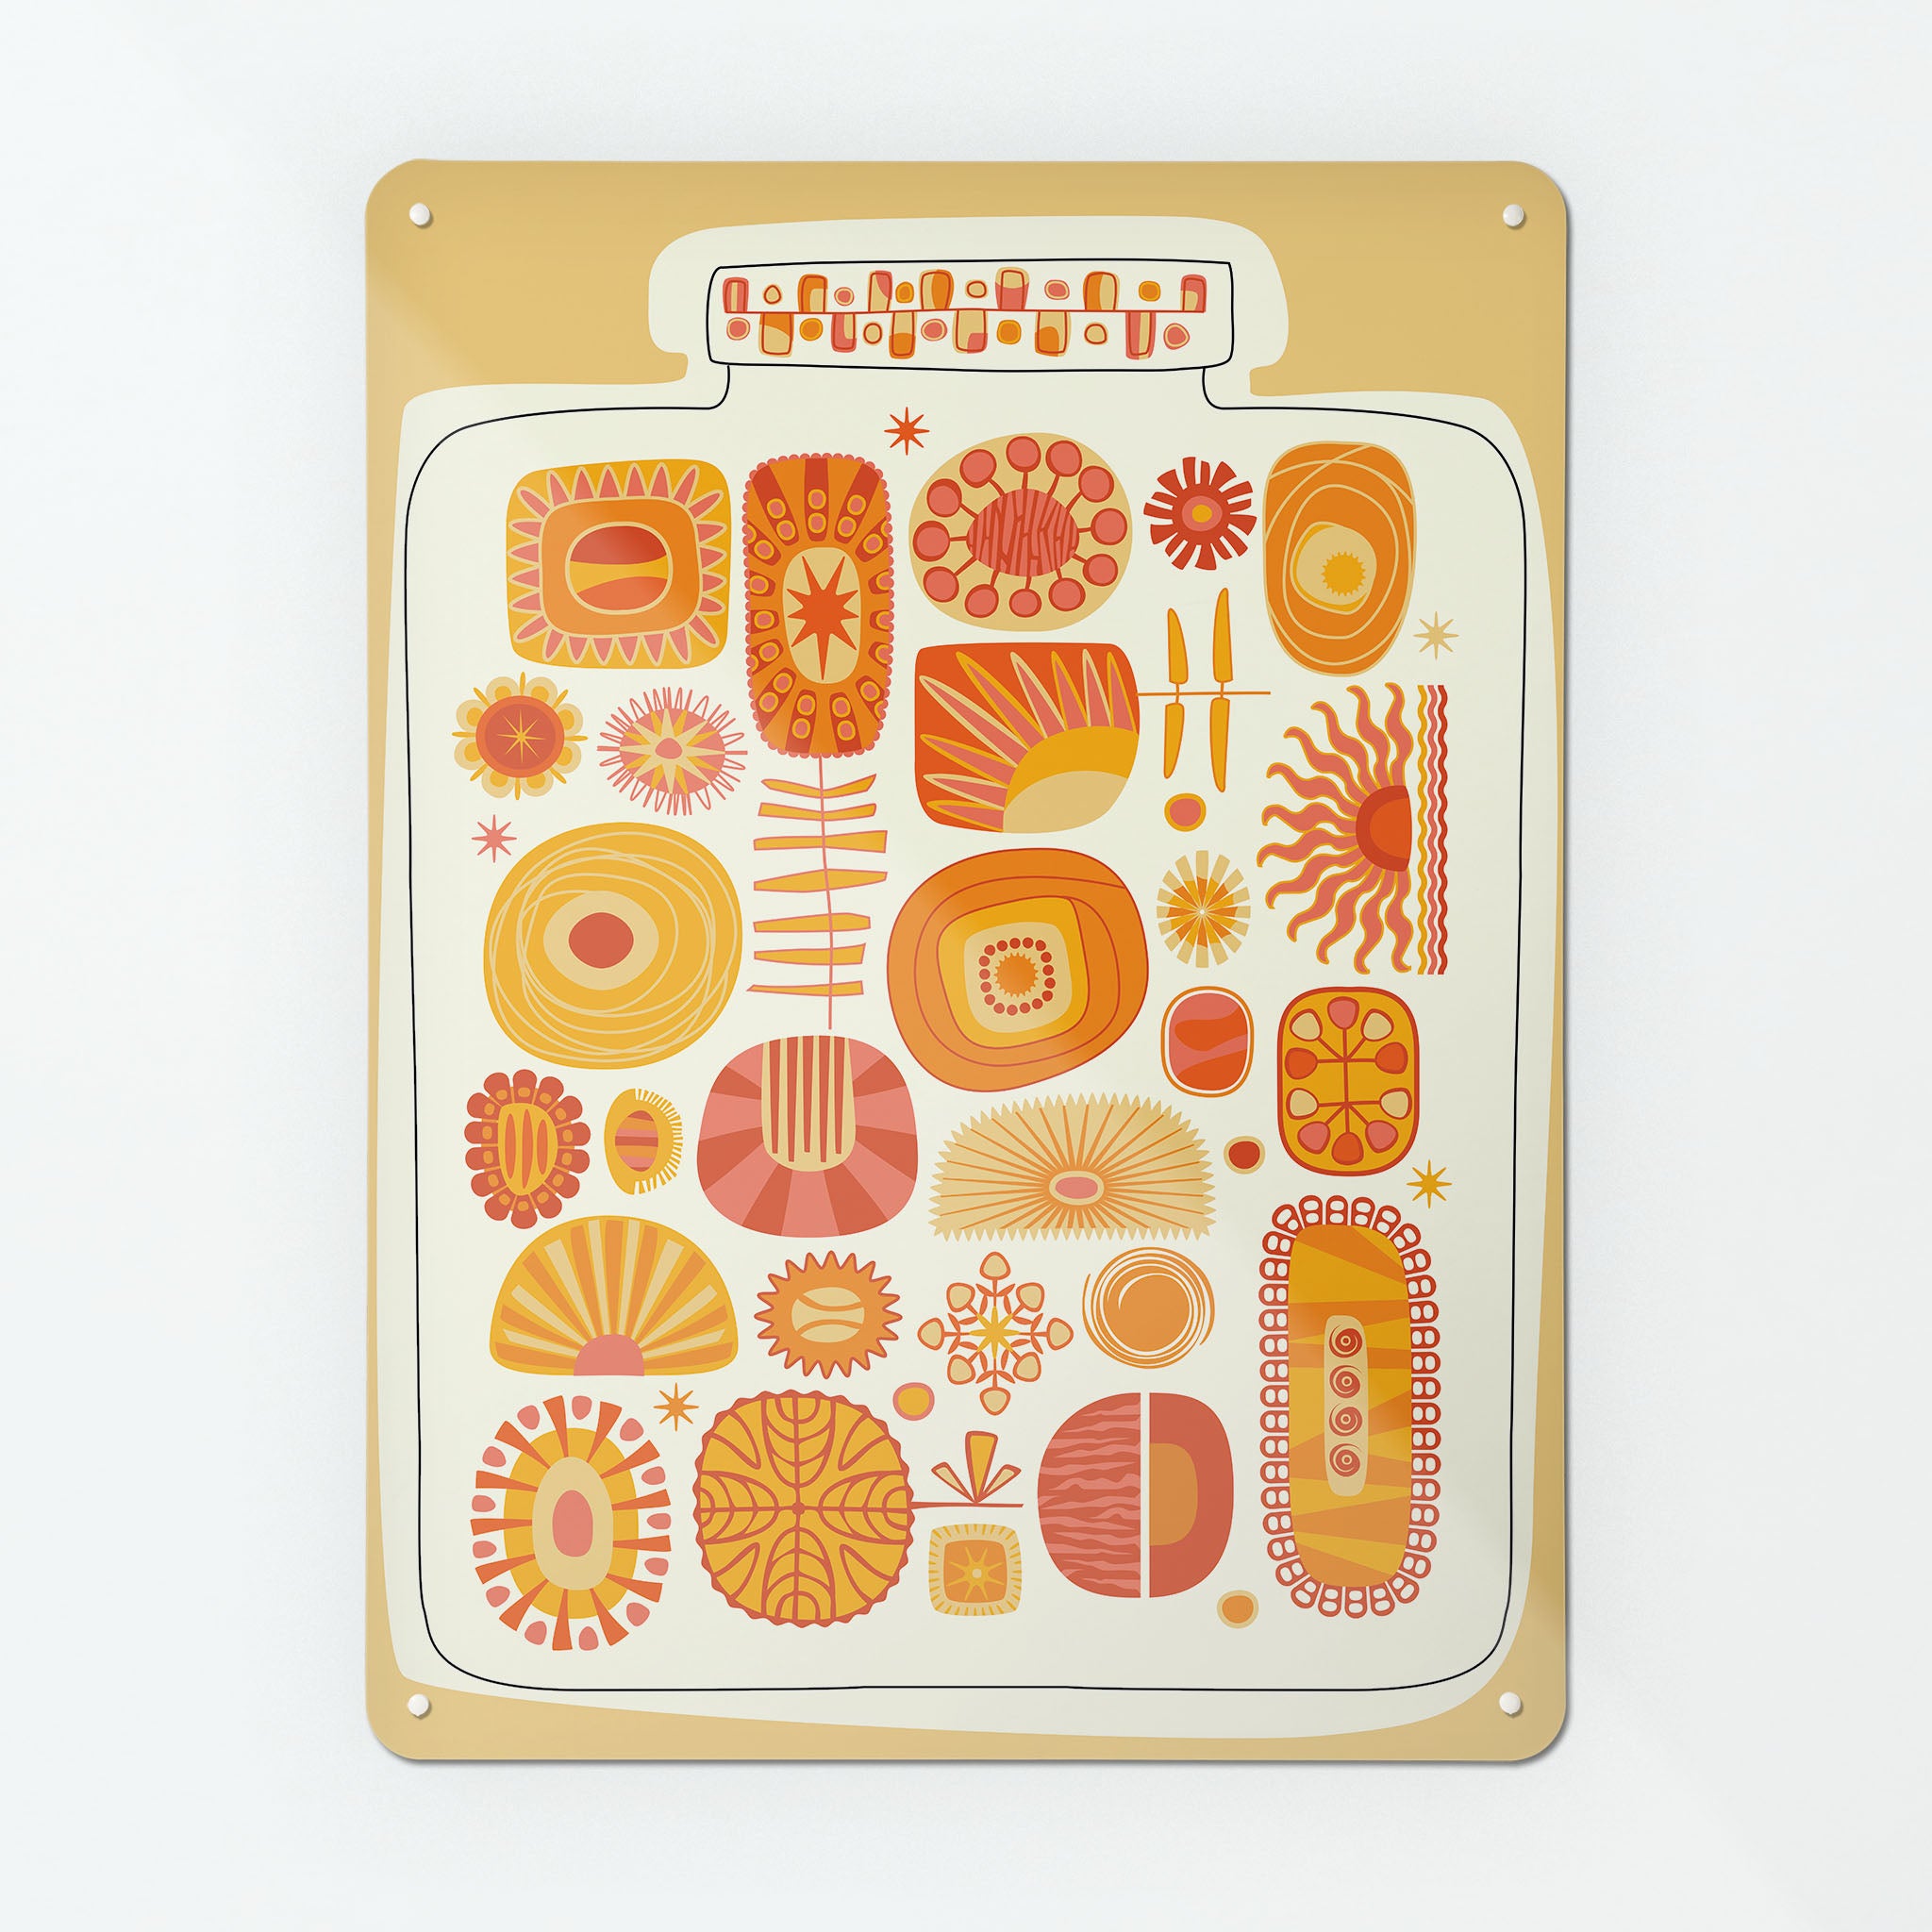 A large magnetic notice board by Beyond the Fridge with a jar full of yellow and orange suns design